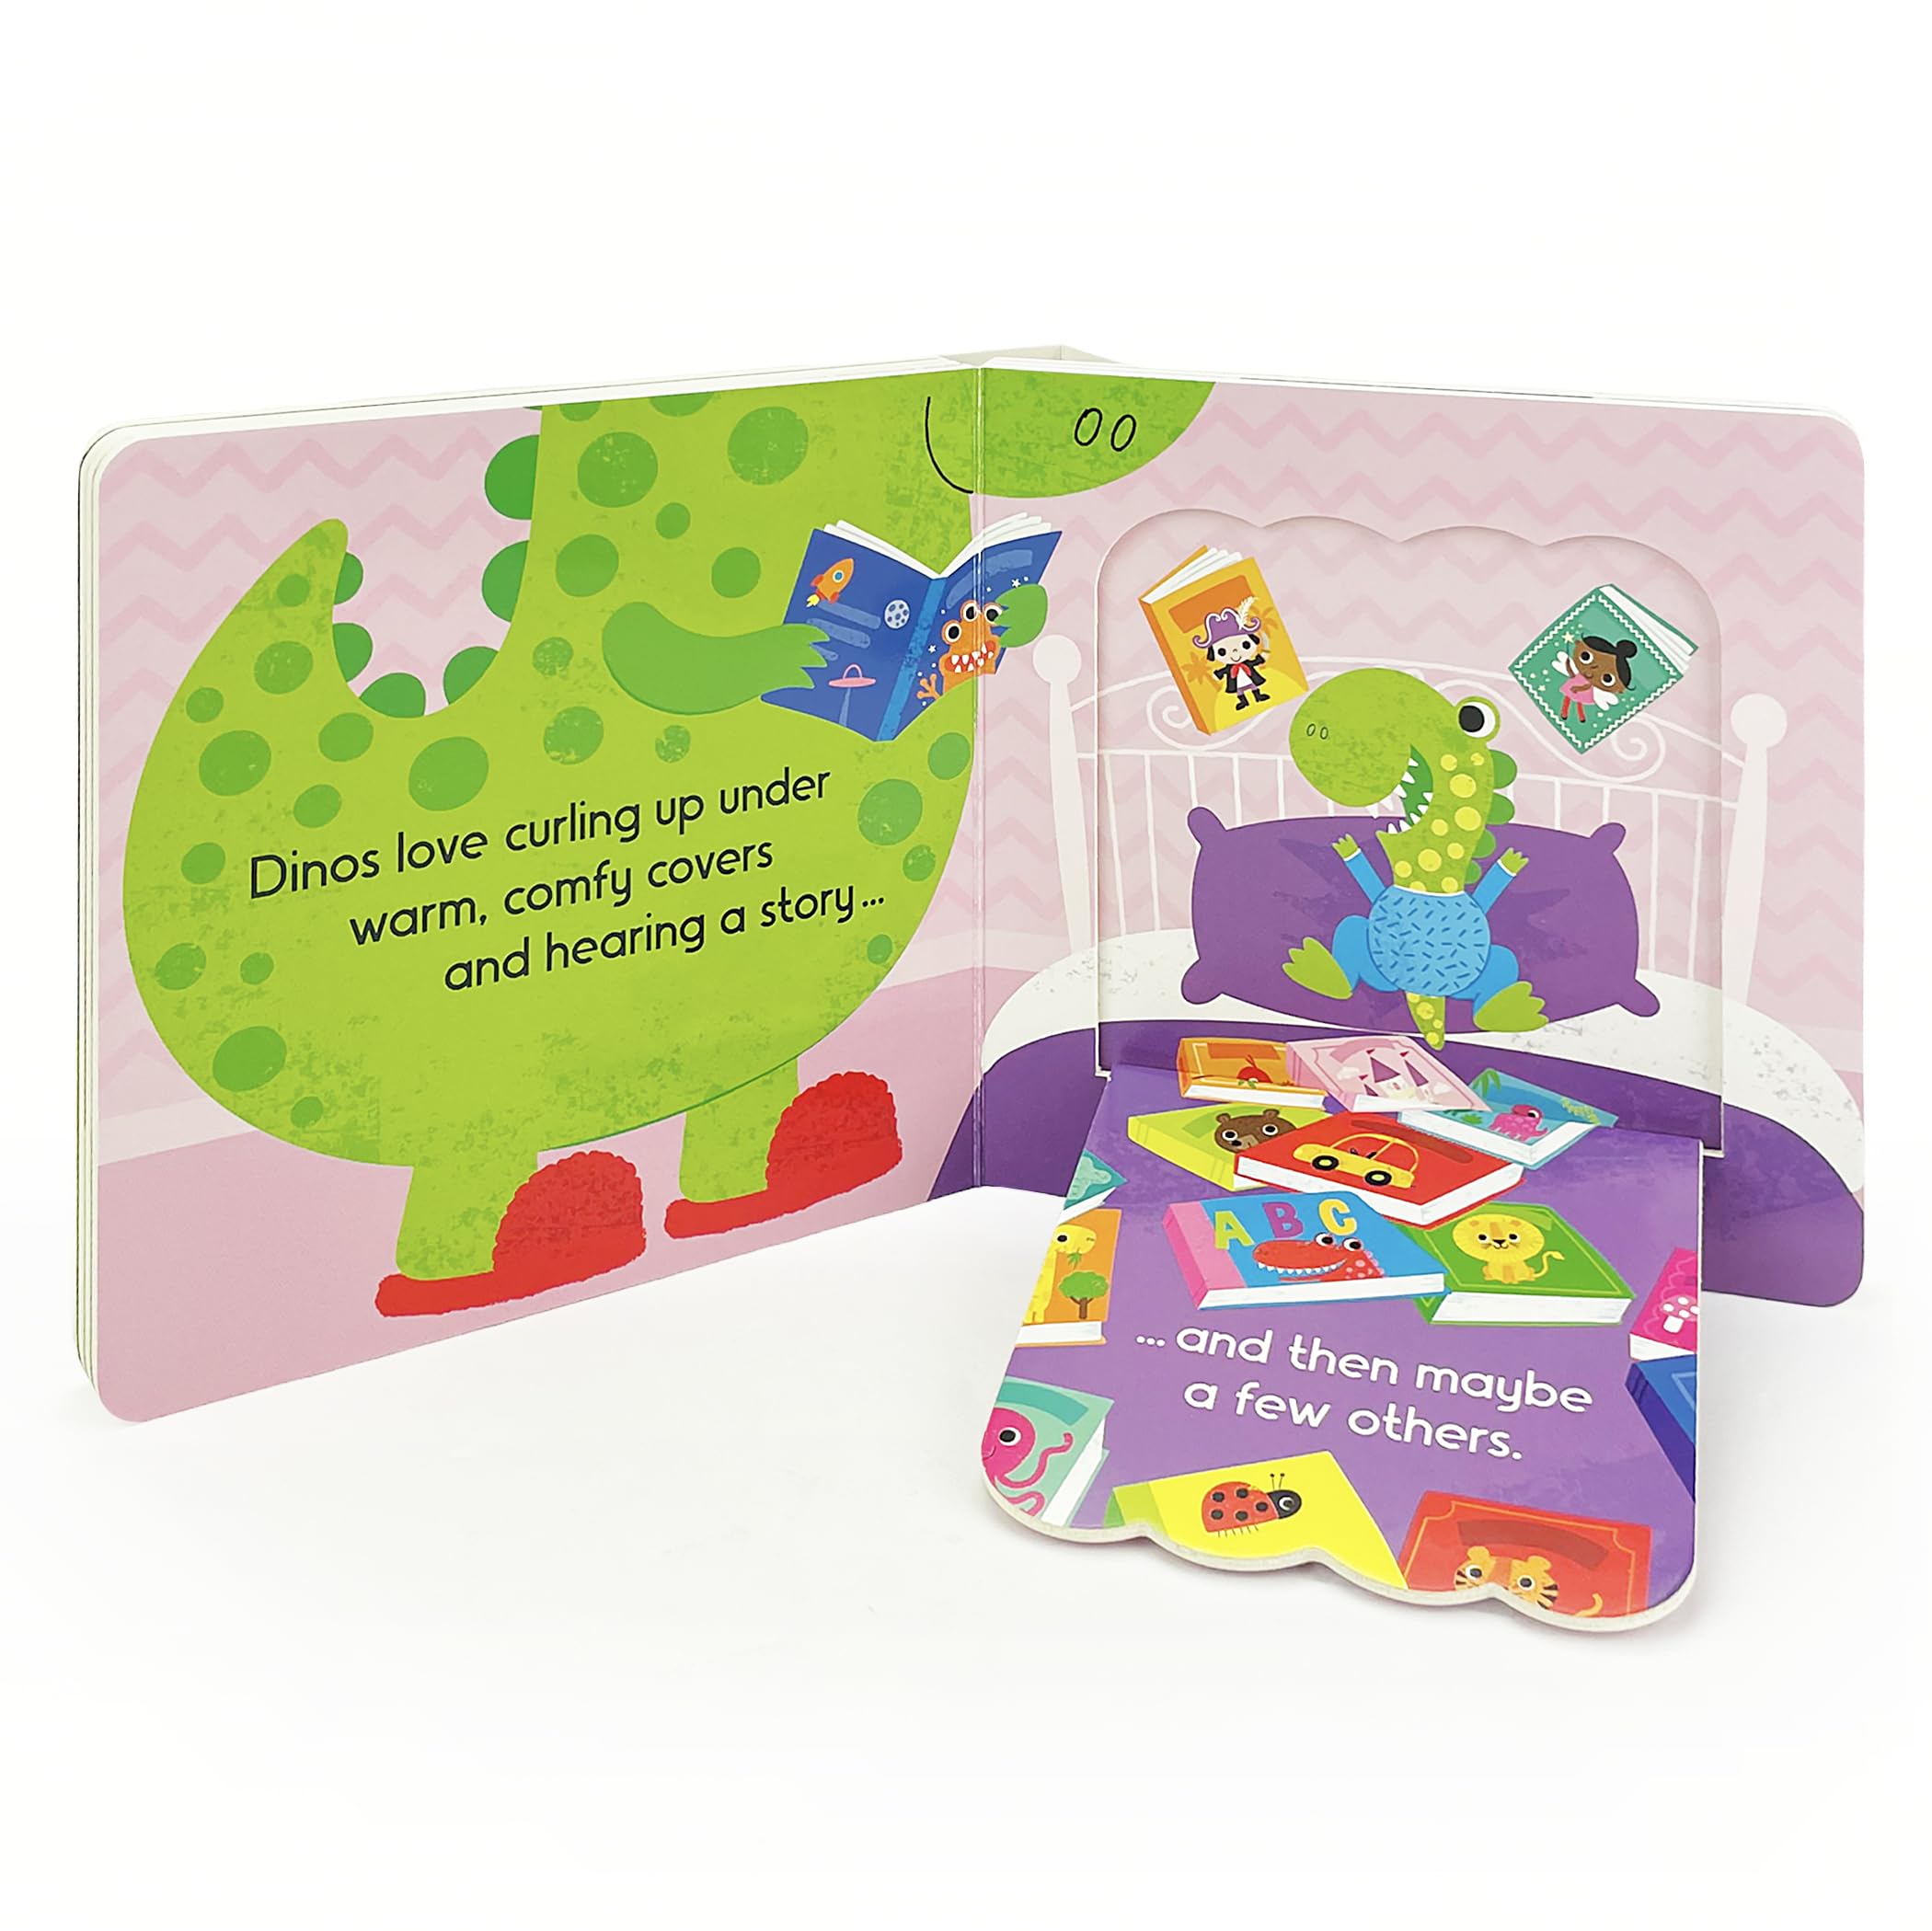 Dinos Love Pajamas - A Lift-a-Flap Dinosaur Bedtime Board Book for Babies and Toddlers; A Going to Bed Goodnight Kids Book